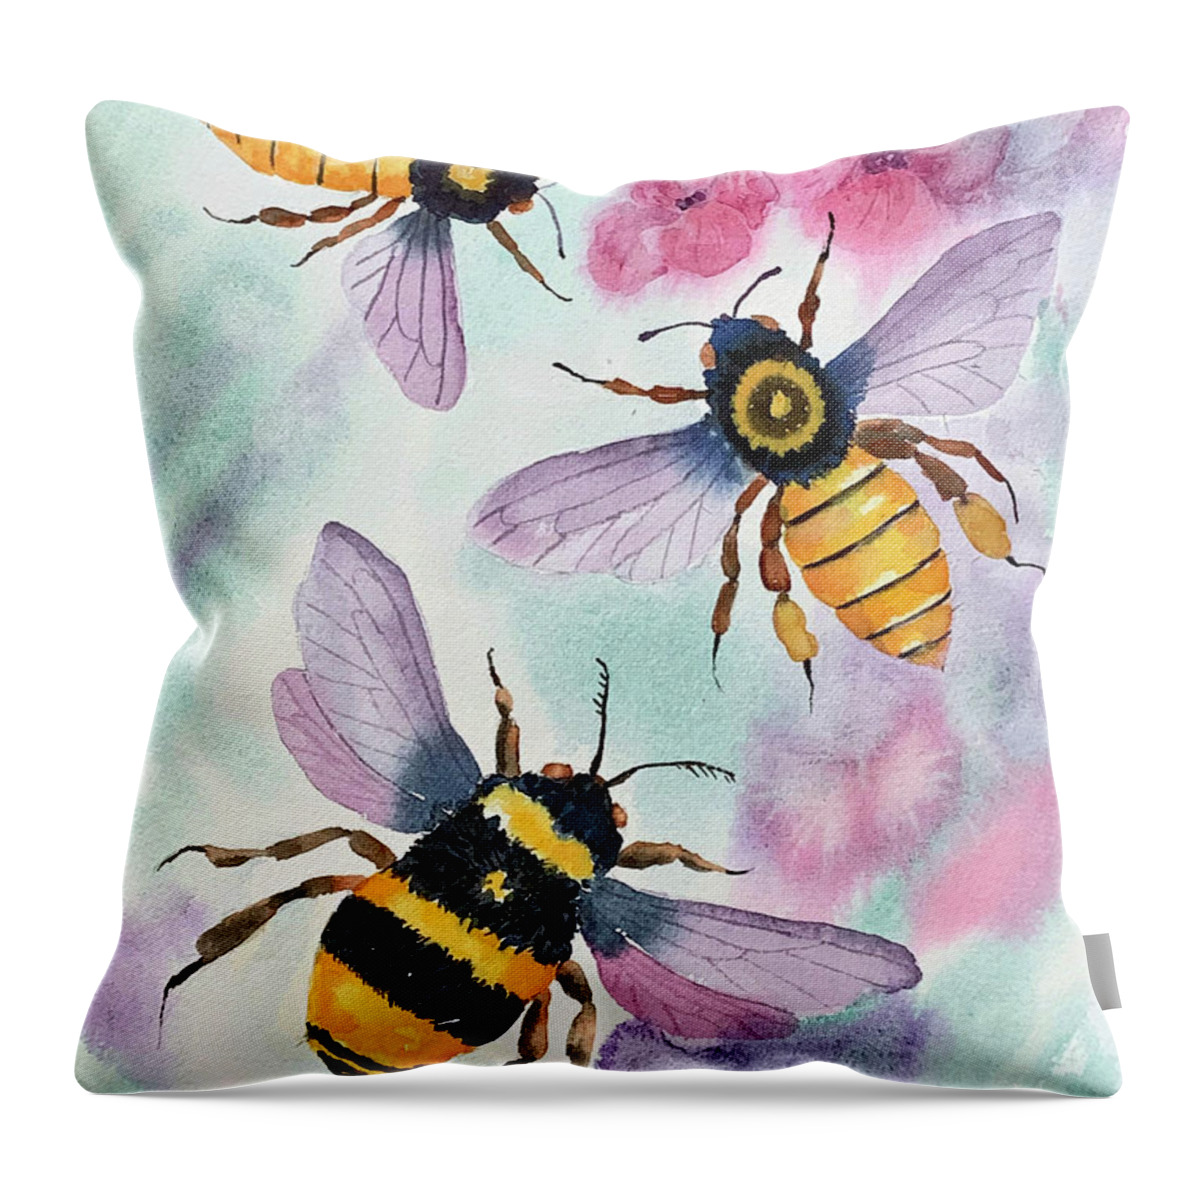 Bees Throw Pillow featuring the painting Bees by Hilda Vandergriff